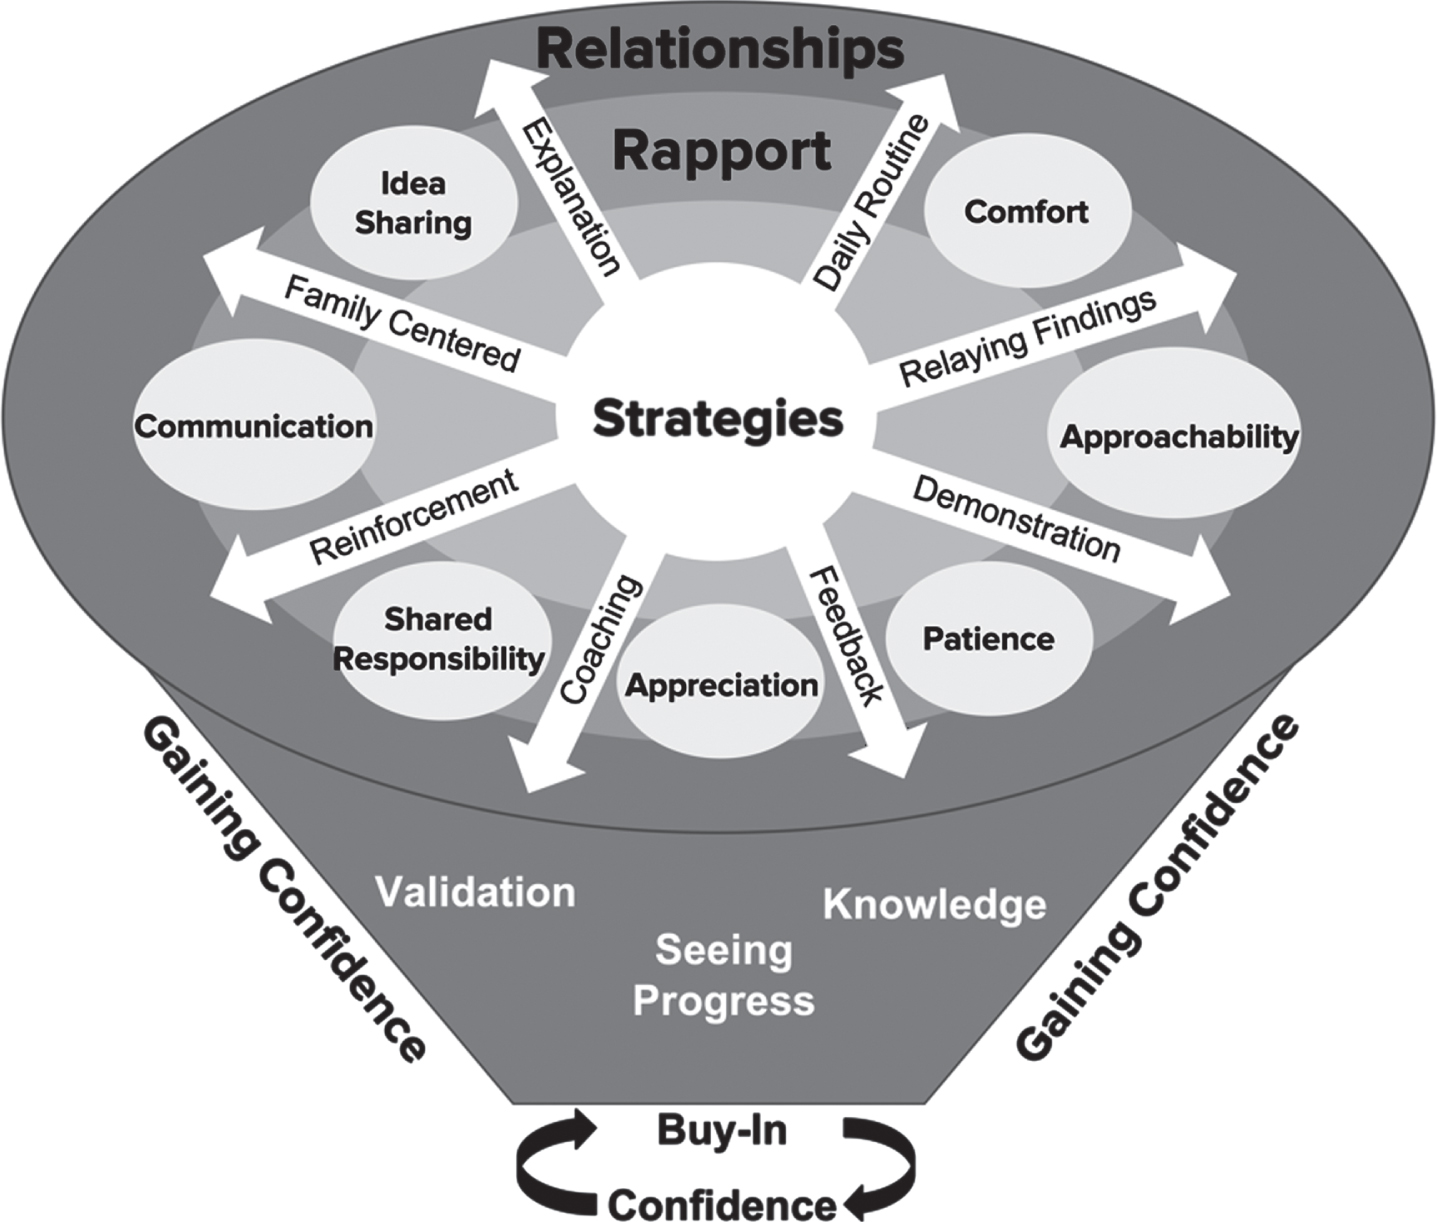 The concept map depicting qualitative themes and their relationships. Several strategies were utilized by the therapists which developed rapport with the families. This rapport helped build the relationship between the therapist and the family, which was the foundation for developing caregiver buy-in. Once this foundational relationship was established, validation, gaining knowledge and seeing child progress enhanced the caregiver’s confidence which promoted buy-in and continued confidence.